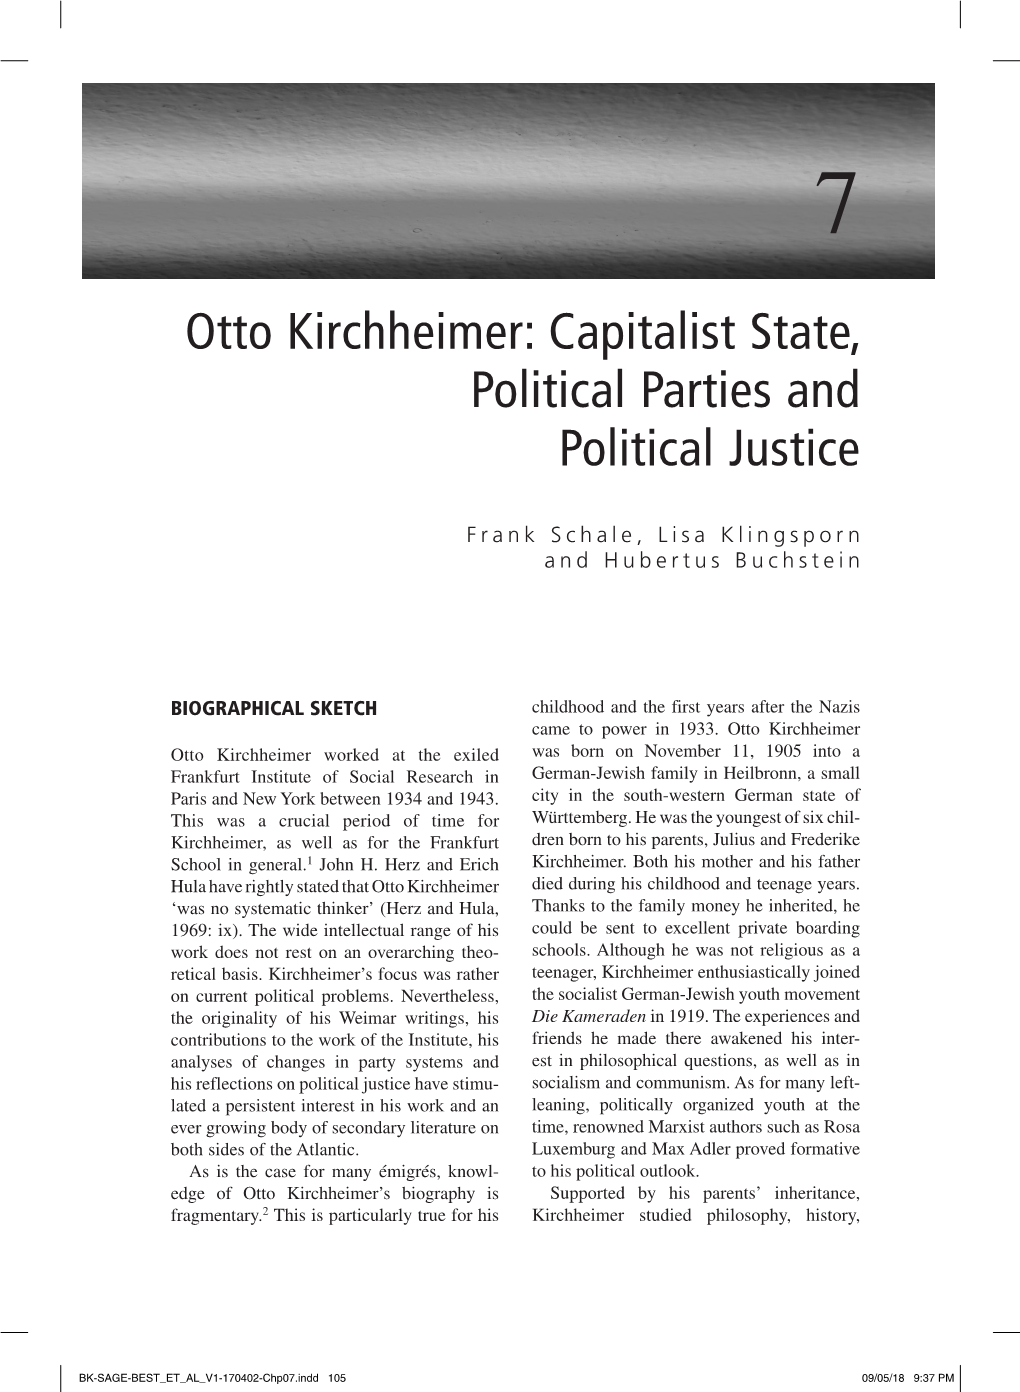 Otto Kirchheimer: Capitalist State, Political Parties and Political Justice